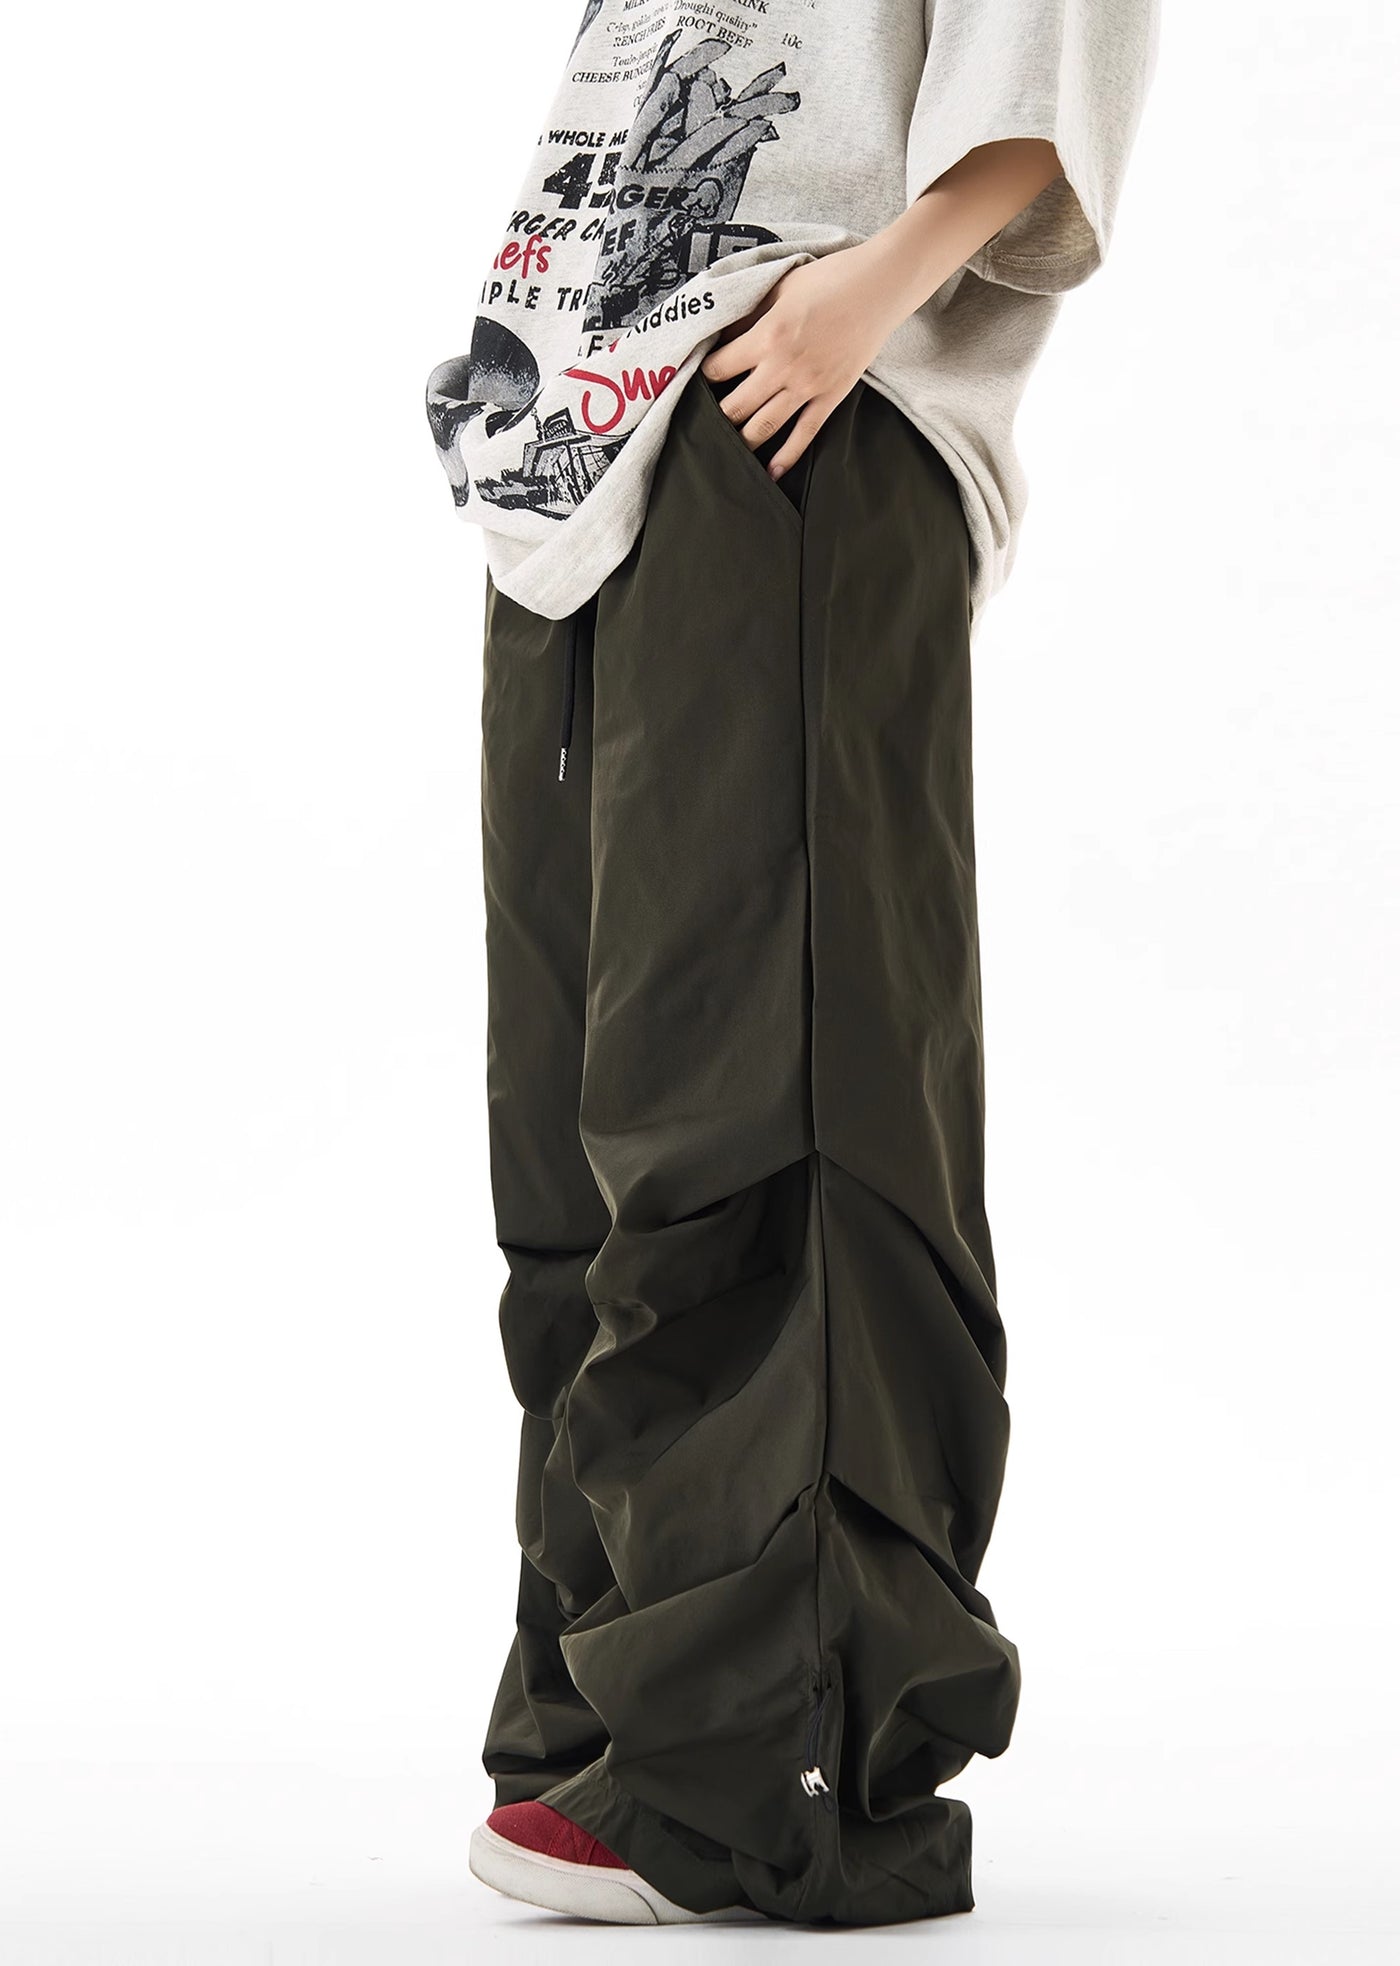 [H GANG X] Loose silhouette tucked-in style wide pants HX0045